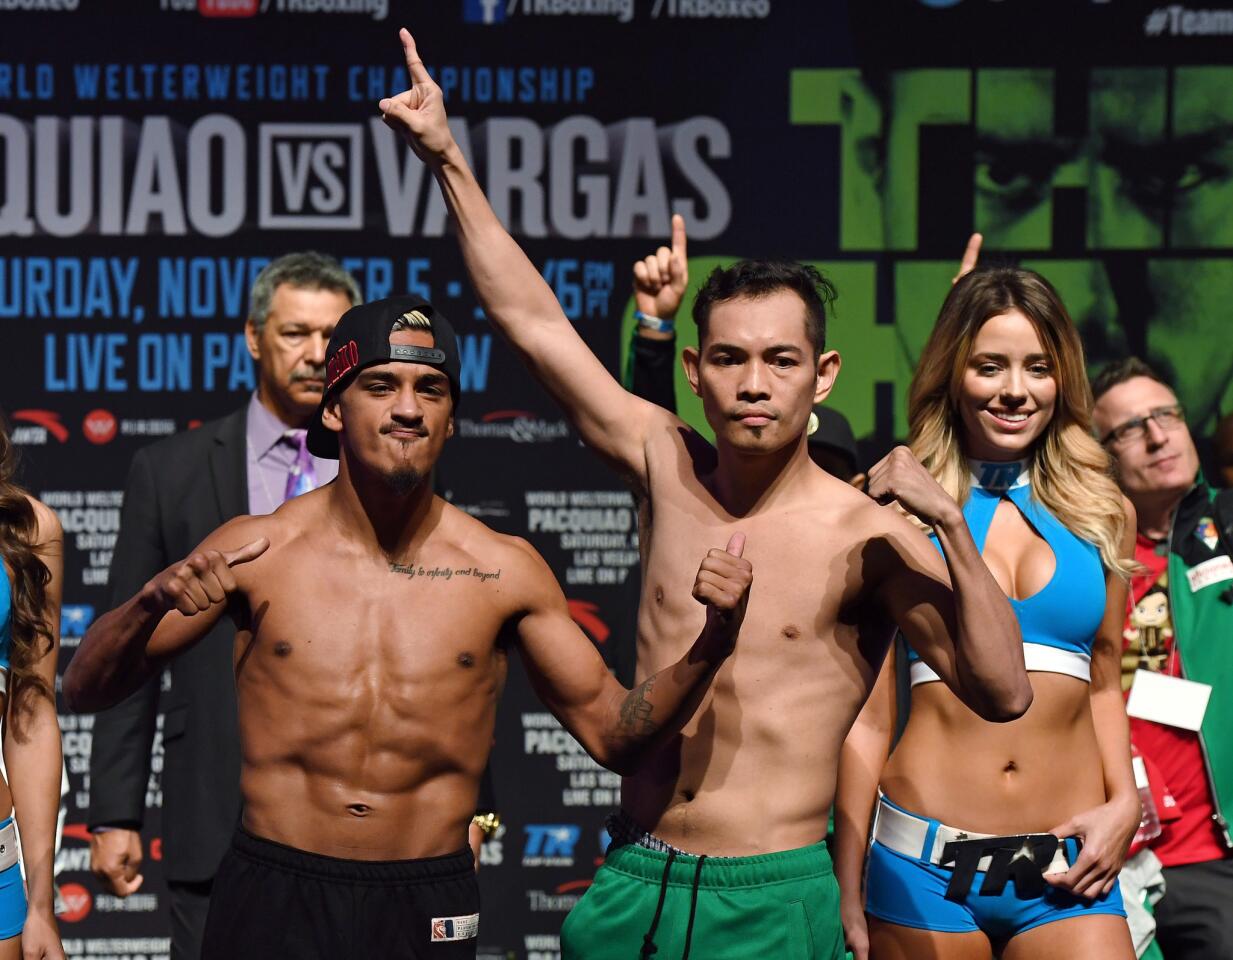 LAS VEGAS, NV - NOVEMBER 04: Jessie Magdaleno (L) and WBO junior featherweight champion Nonito Donaire pose during their official weigh-in at the Encore Theater at Wynn Las Vegas on November 4, 2016 in Las Vegas, Nevada. Donaire will defend his title against Magdaleno on November 5 at the Thomas & Mack Center in Las Vegas. (Photo by Ethan Miller/Getty Images) ** OUTS - ELSENT, FPG, CM - OUTS * NM, PH, VA if sourced by CT, LA or MoD **